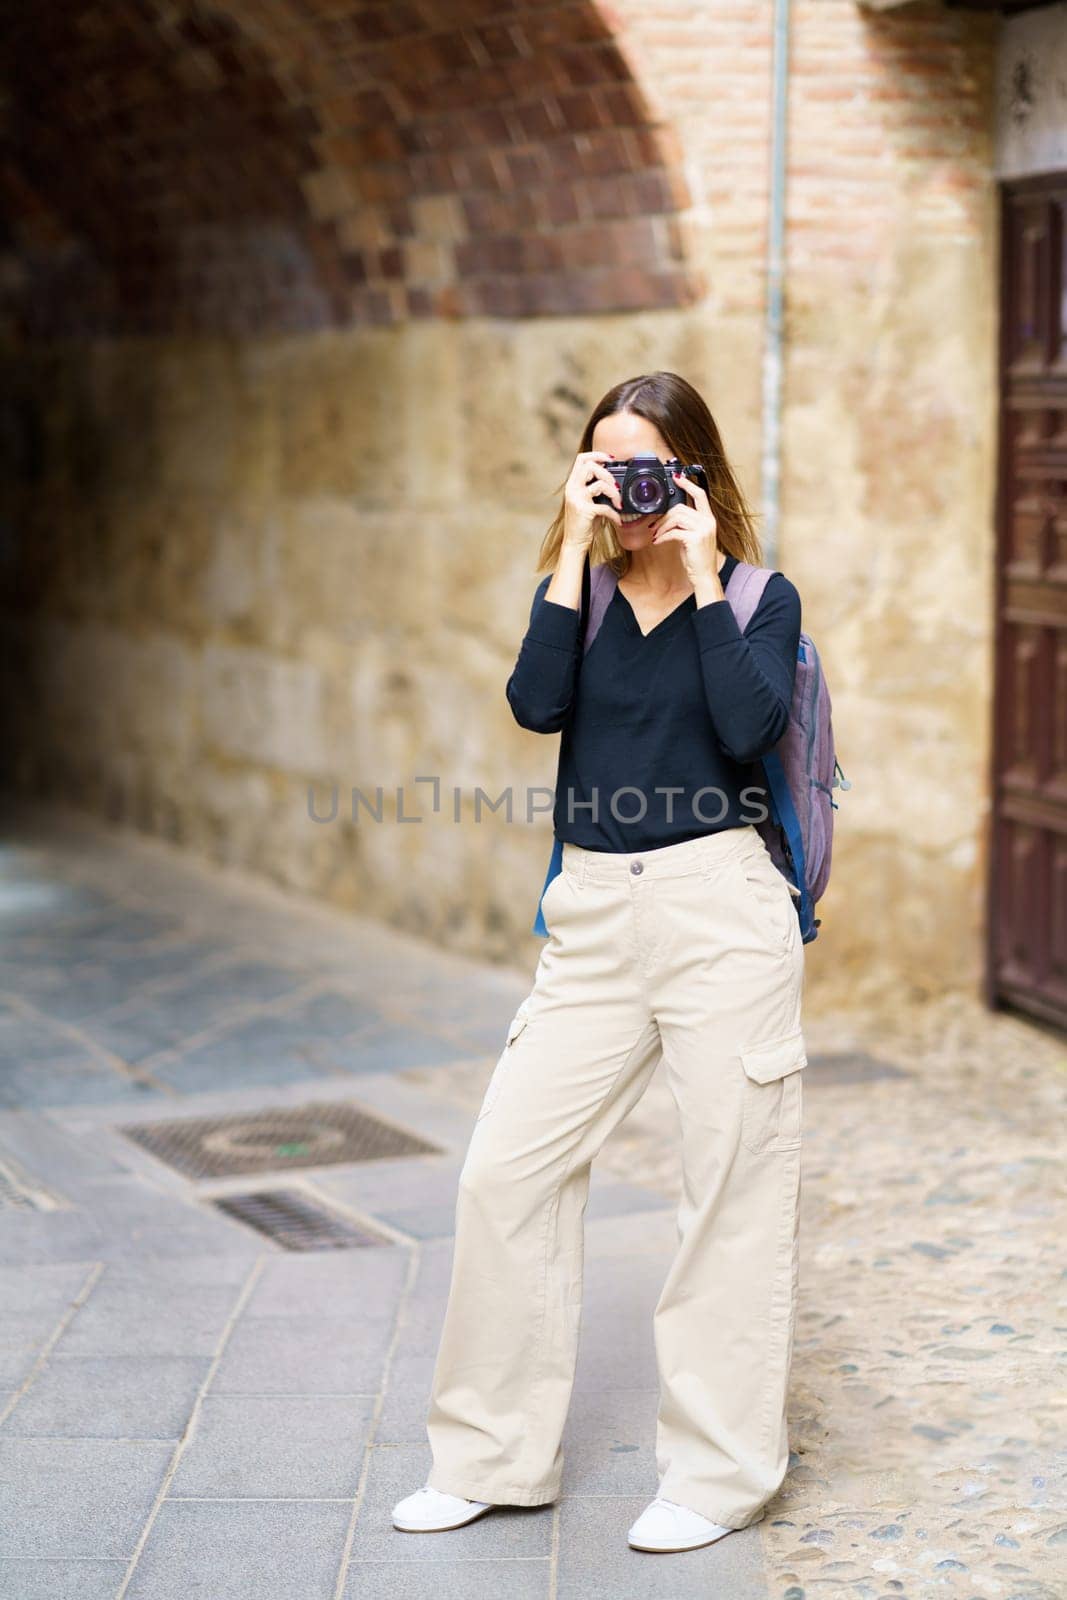 Content woman taking photos on camera near arched passage in old town by javiindy